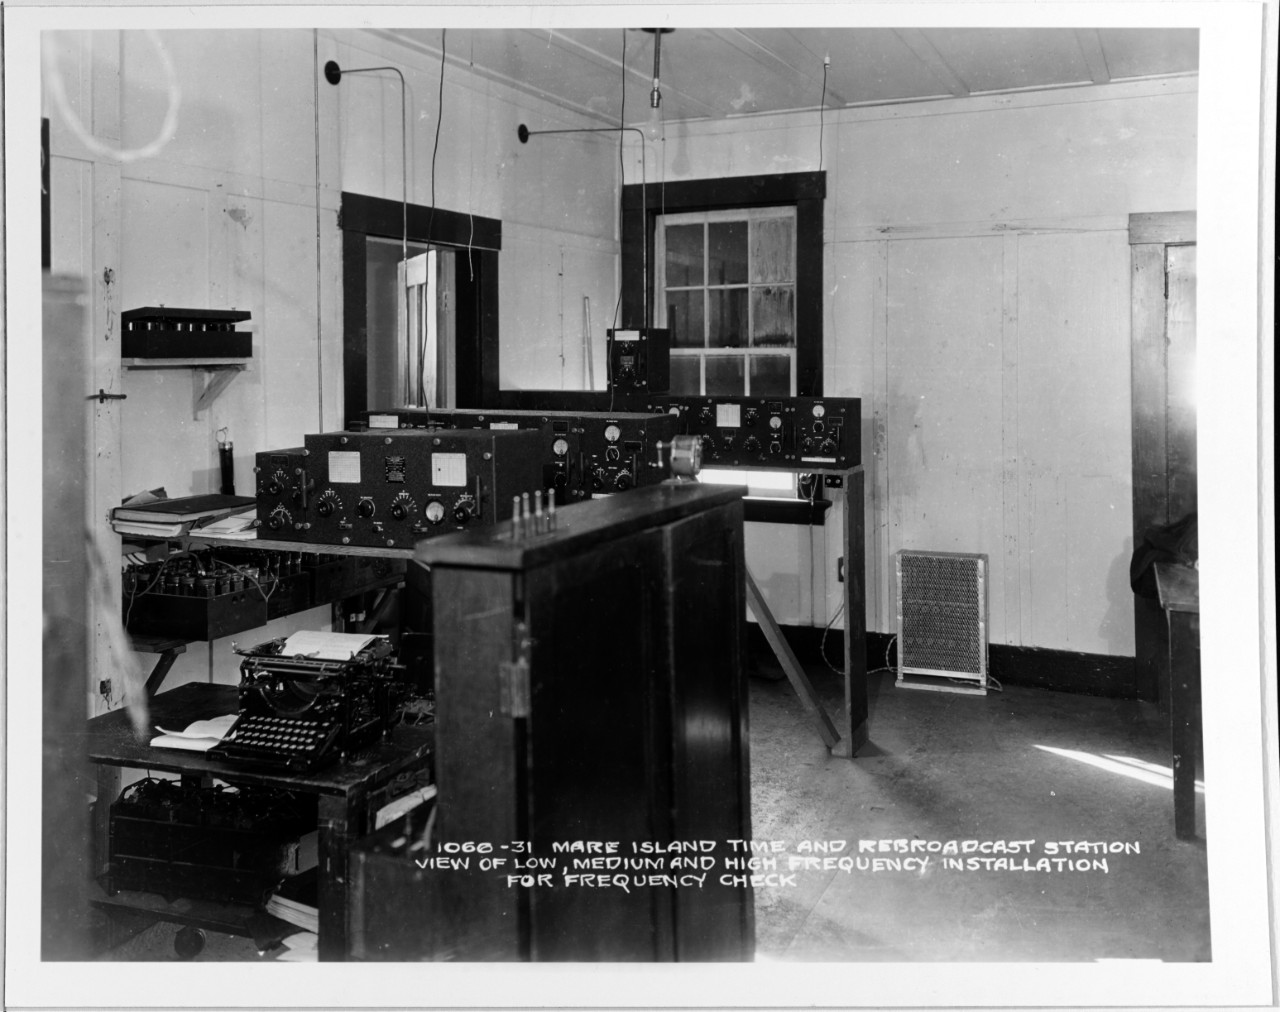 Time and rebroadcast station, Mare Island, California, 1931.